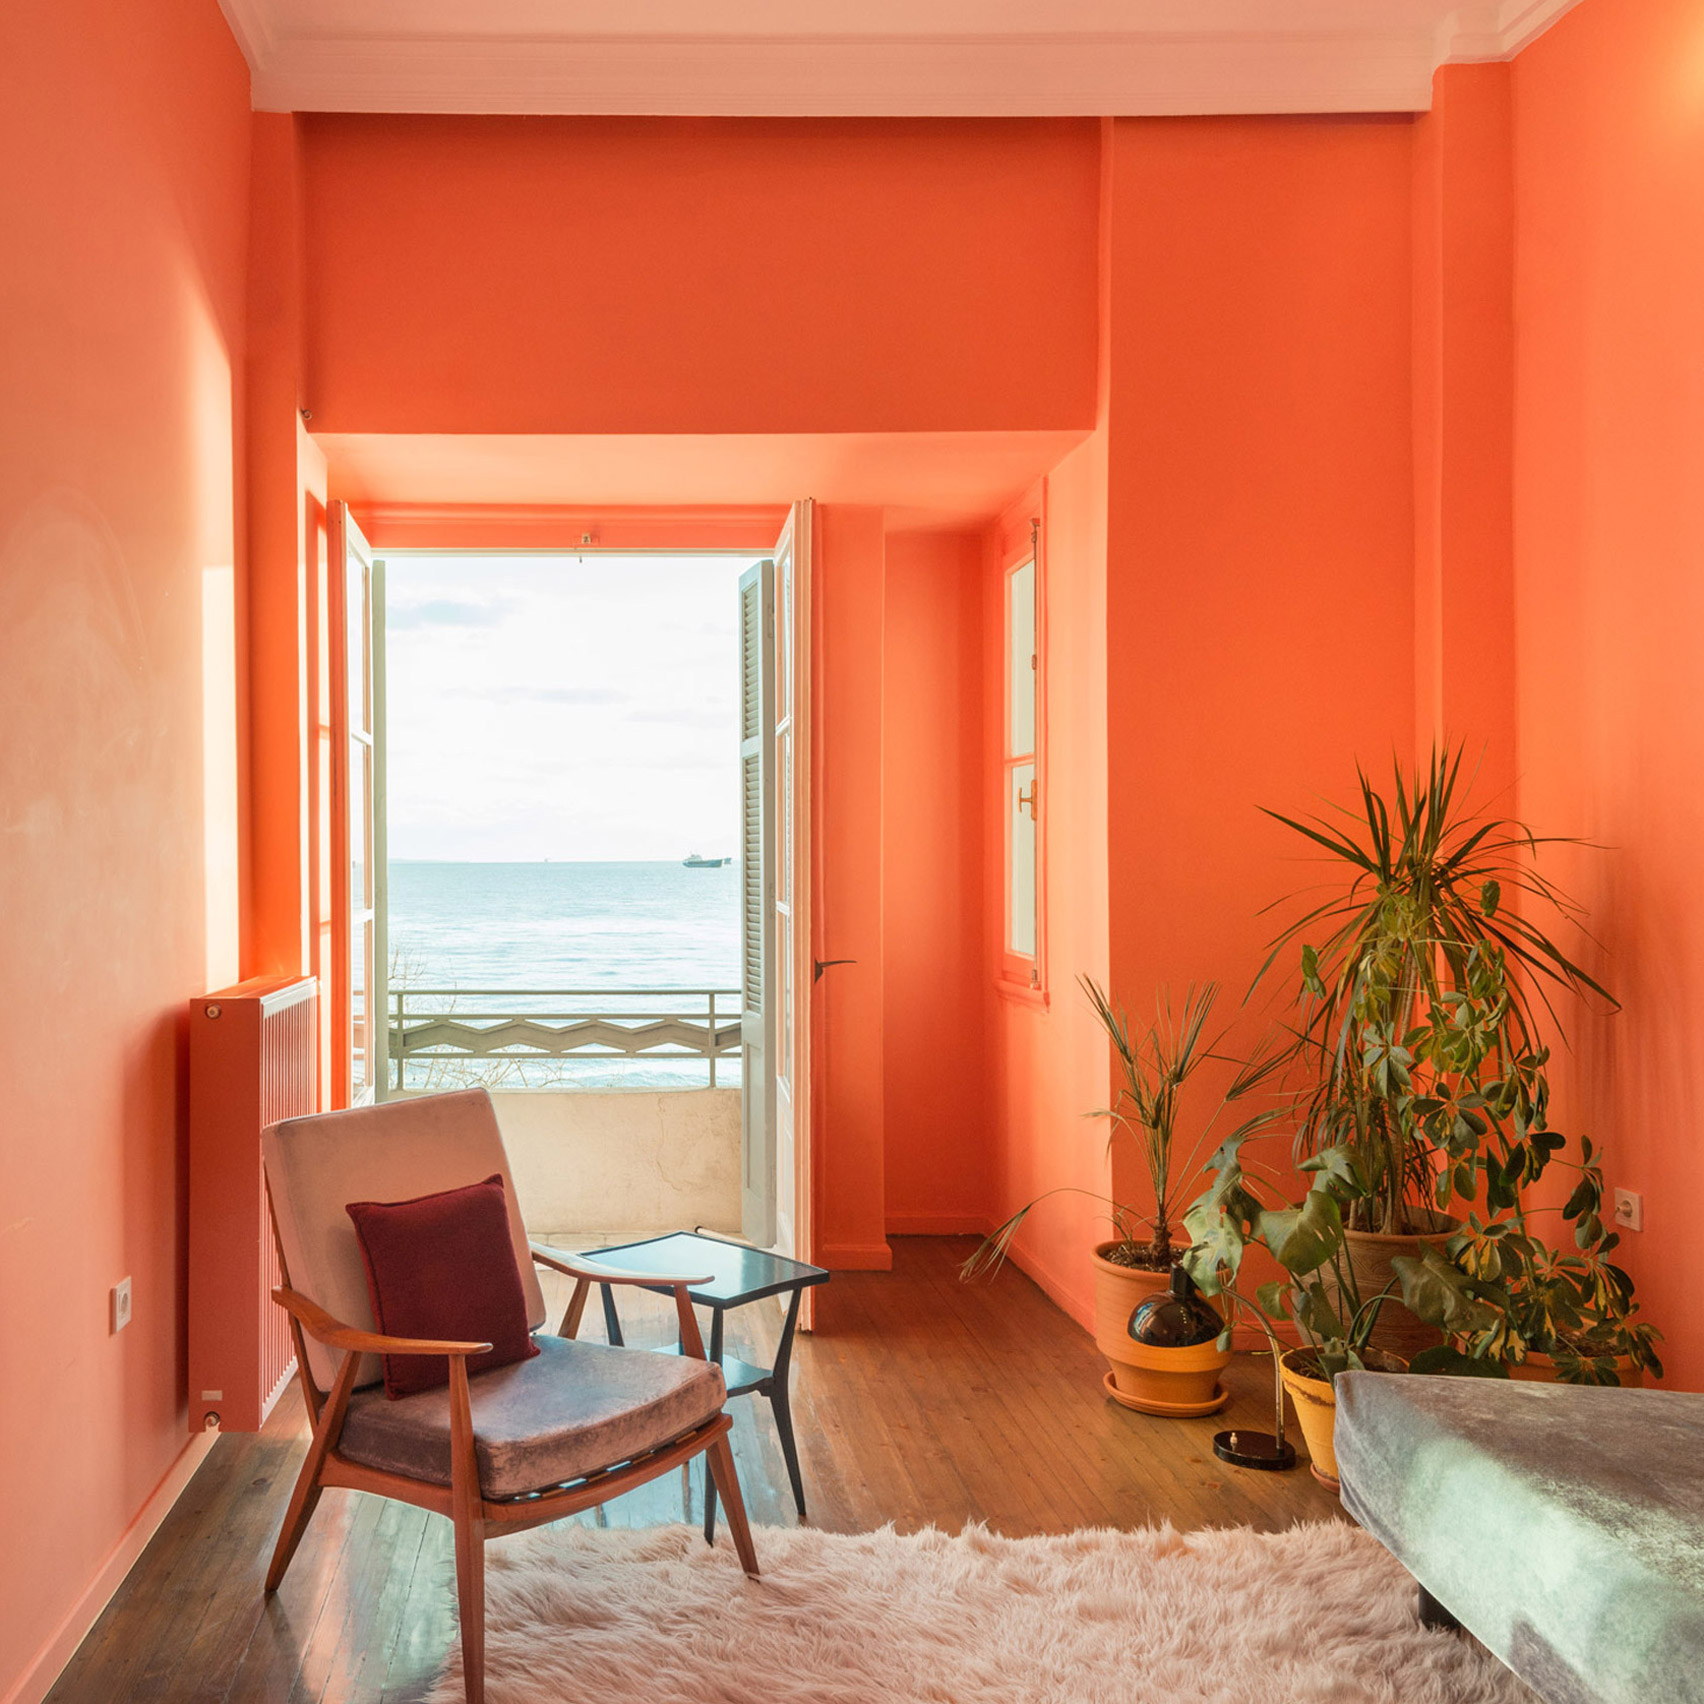 5 Restaurant Interiors That Make Use of Pantone's Color Of The